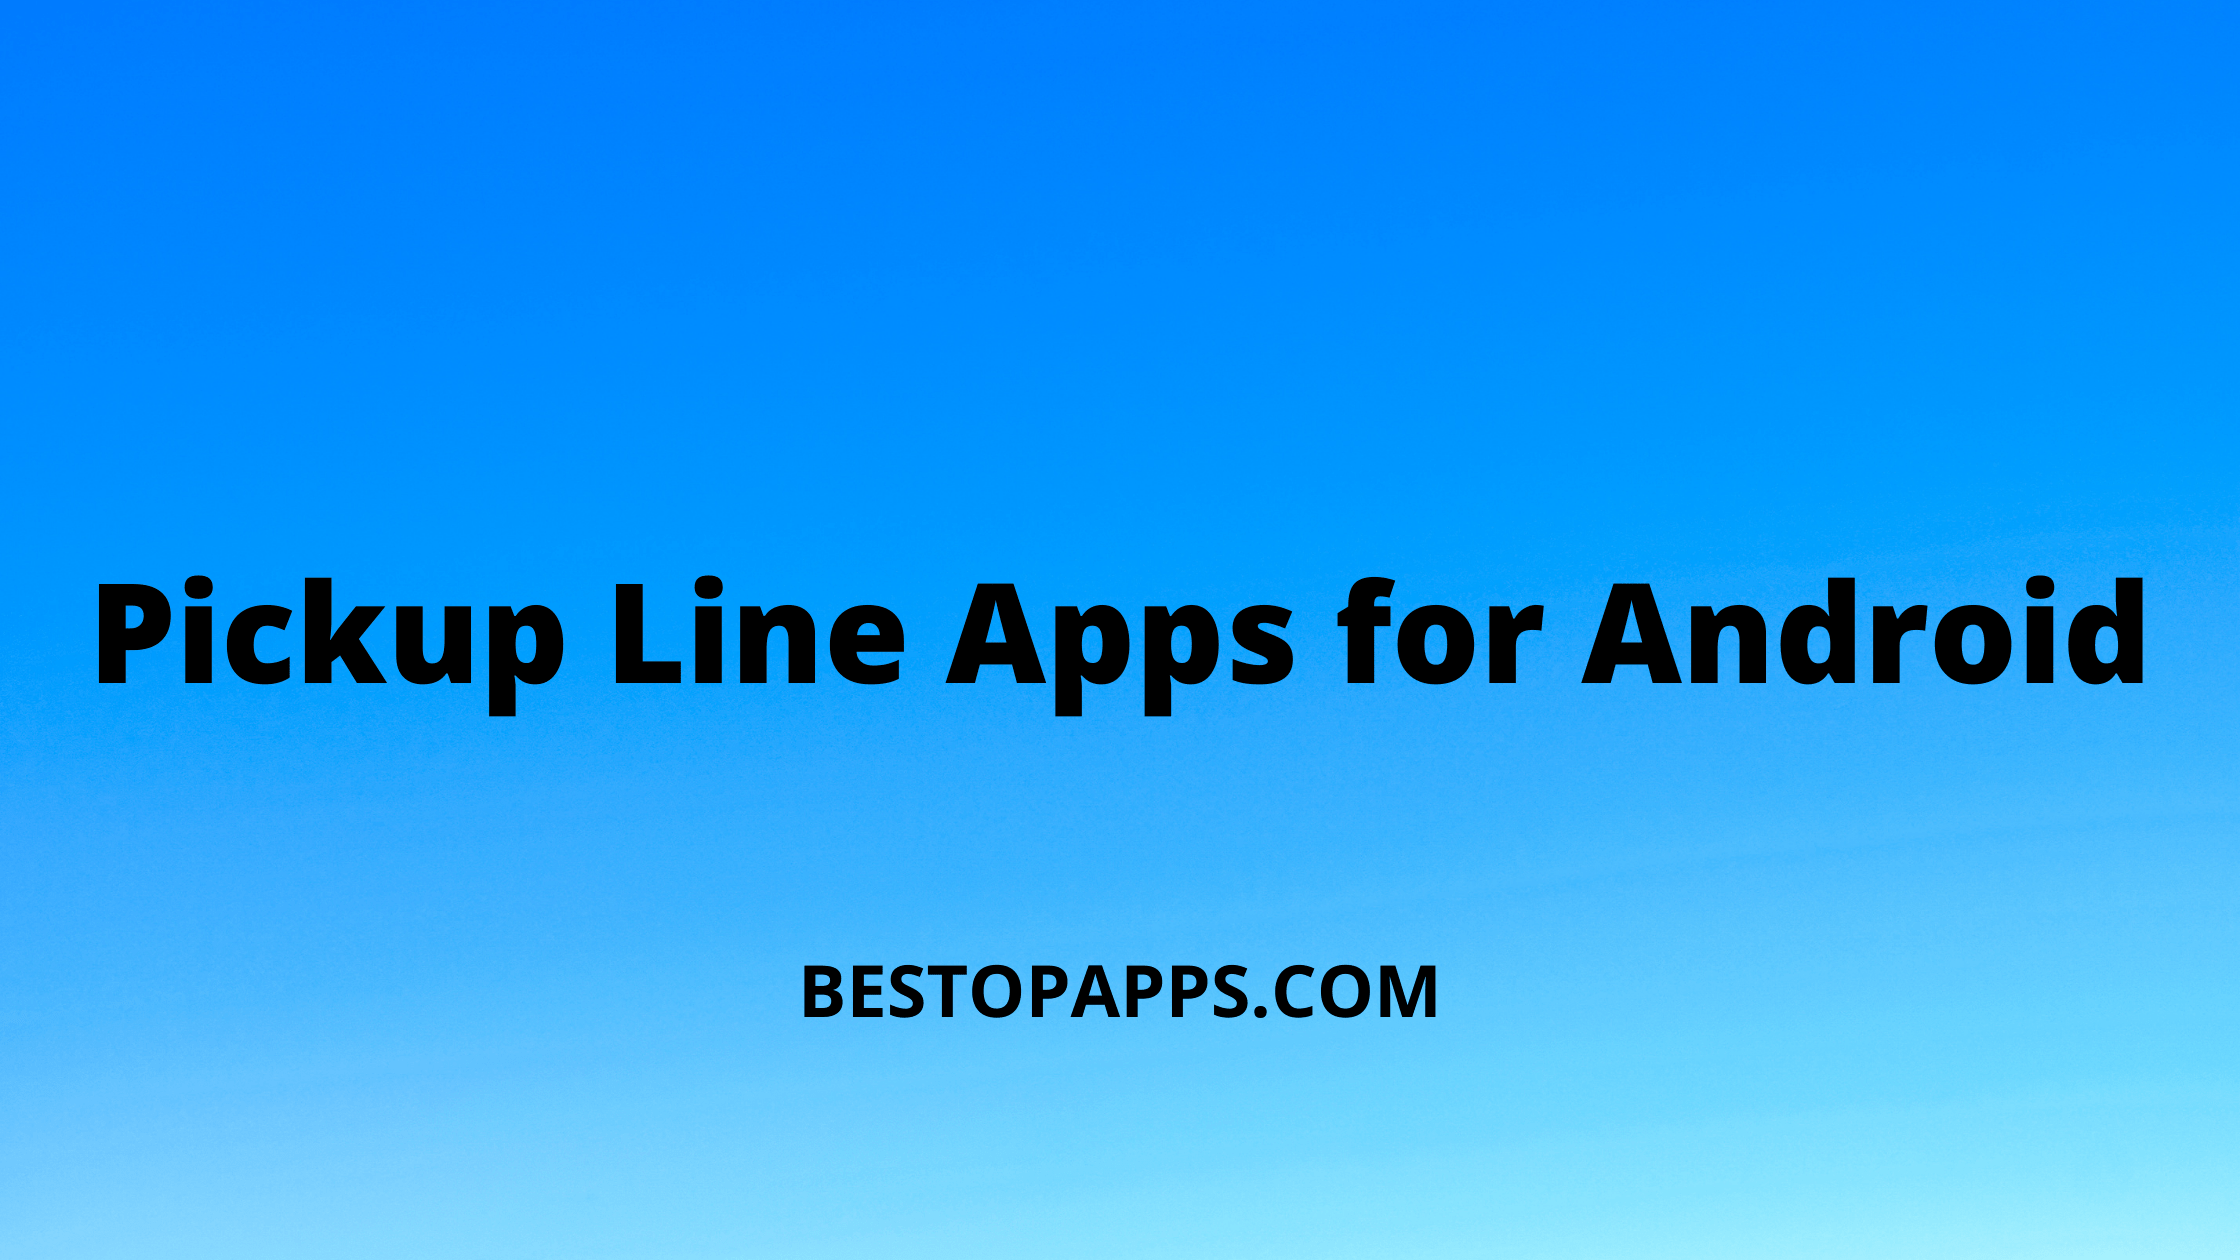 Pickup Line Apps for Android